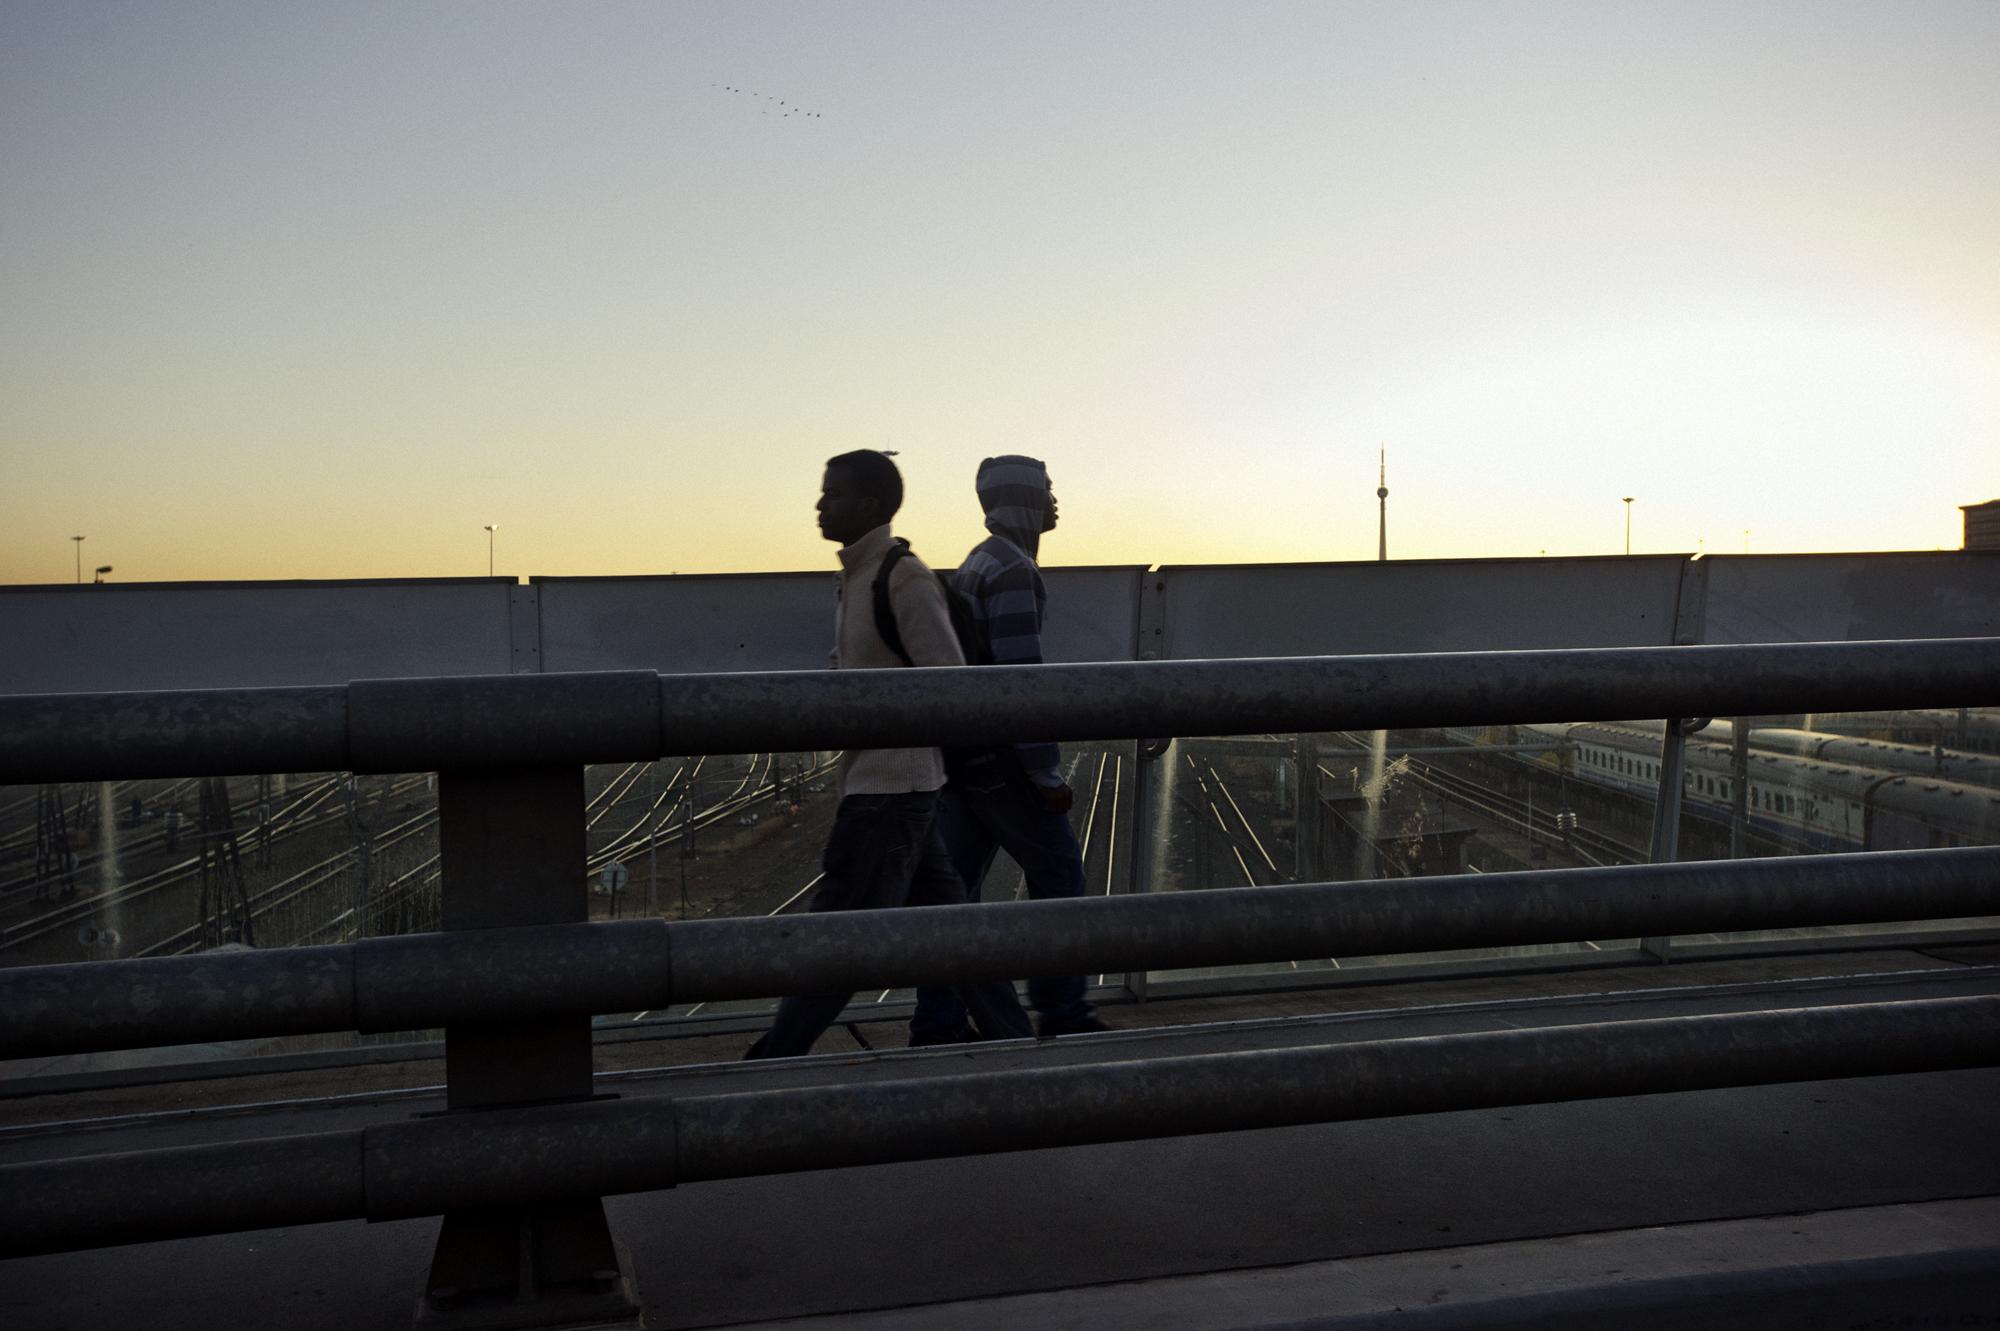 Into the shadows - Johannesburg, South Africa.
June 2011.
Men walking the...